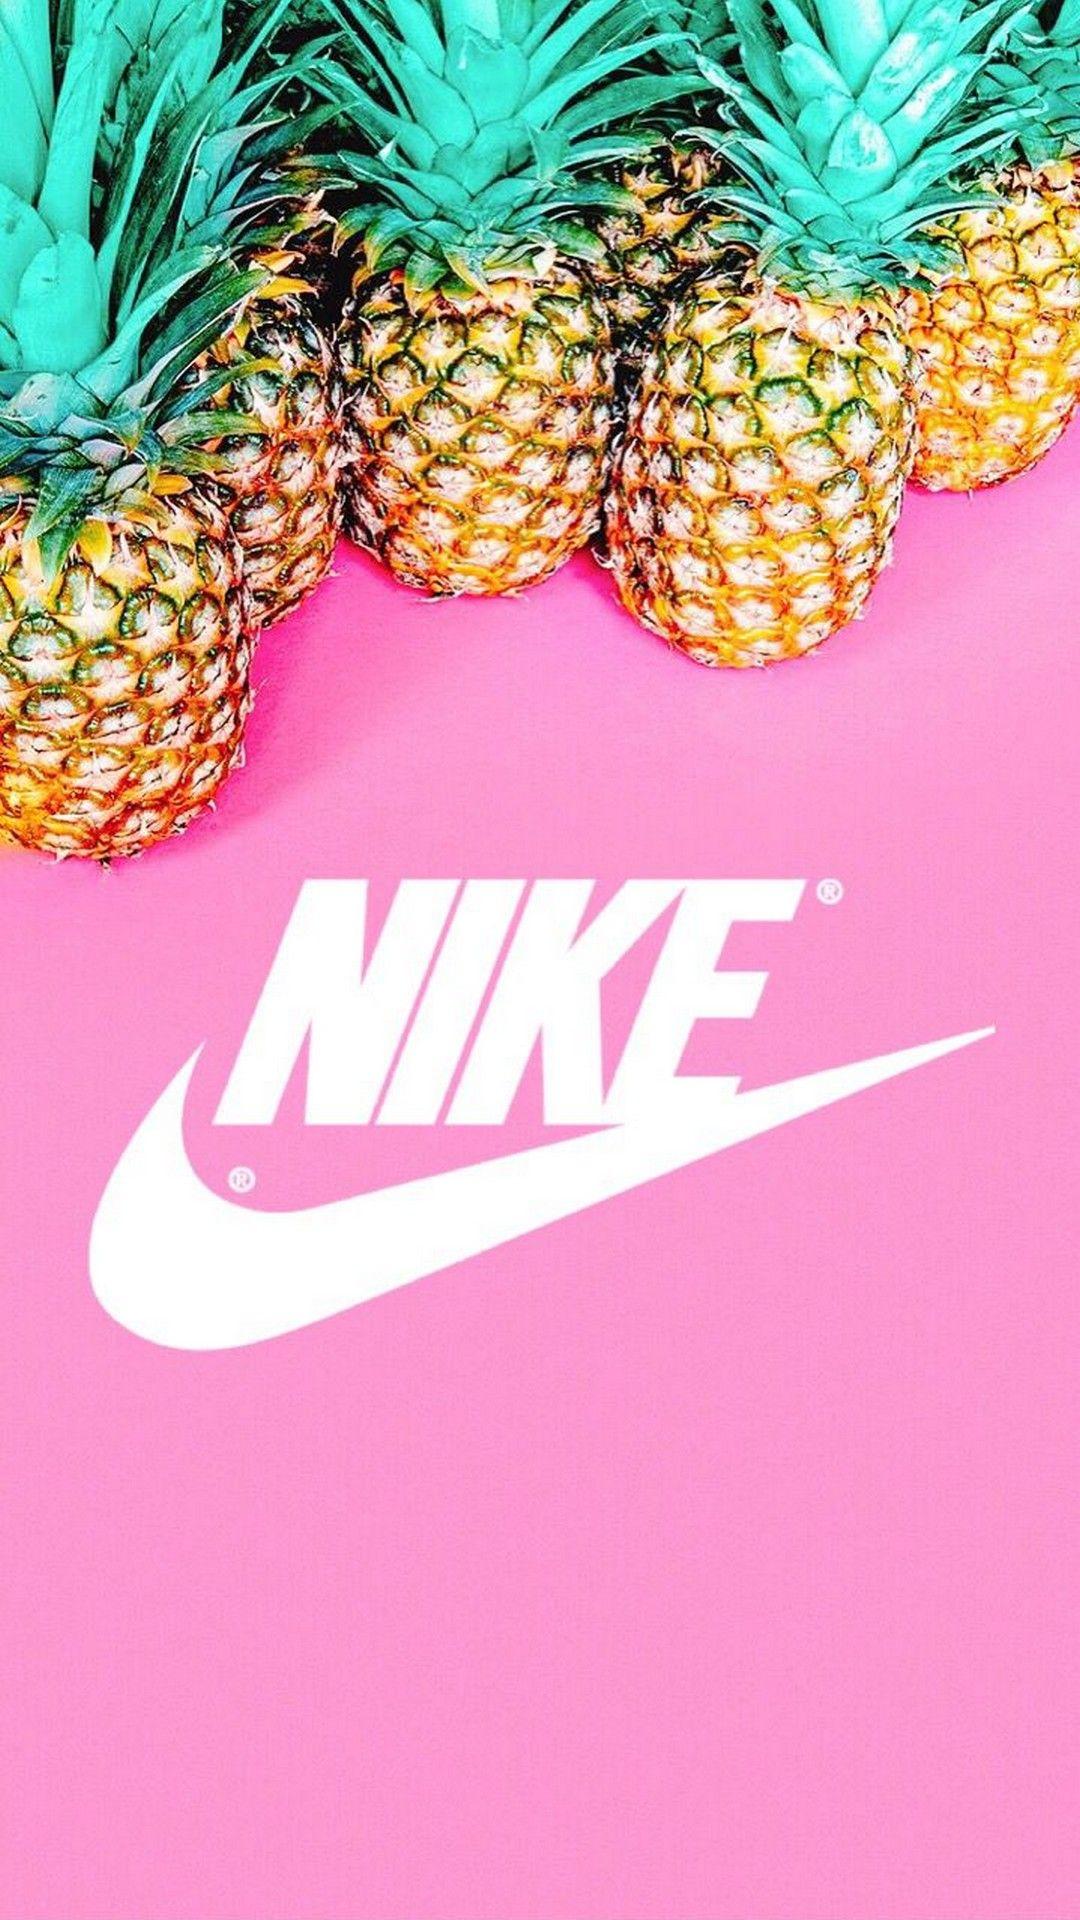 Nike Pineapple Pink Background 3D iPhone Wallpaper